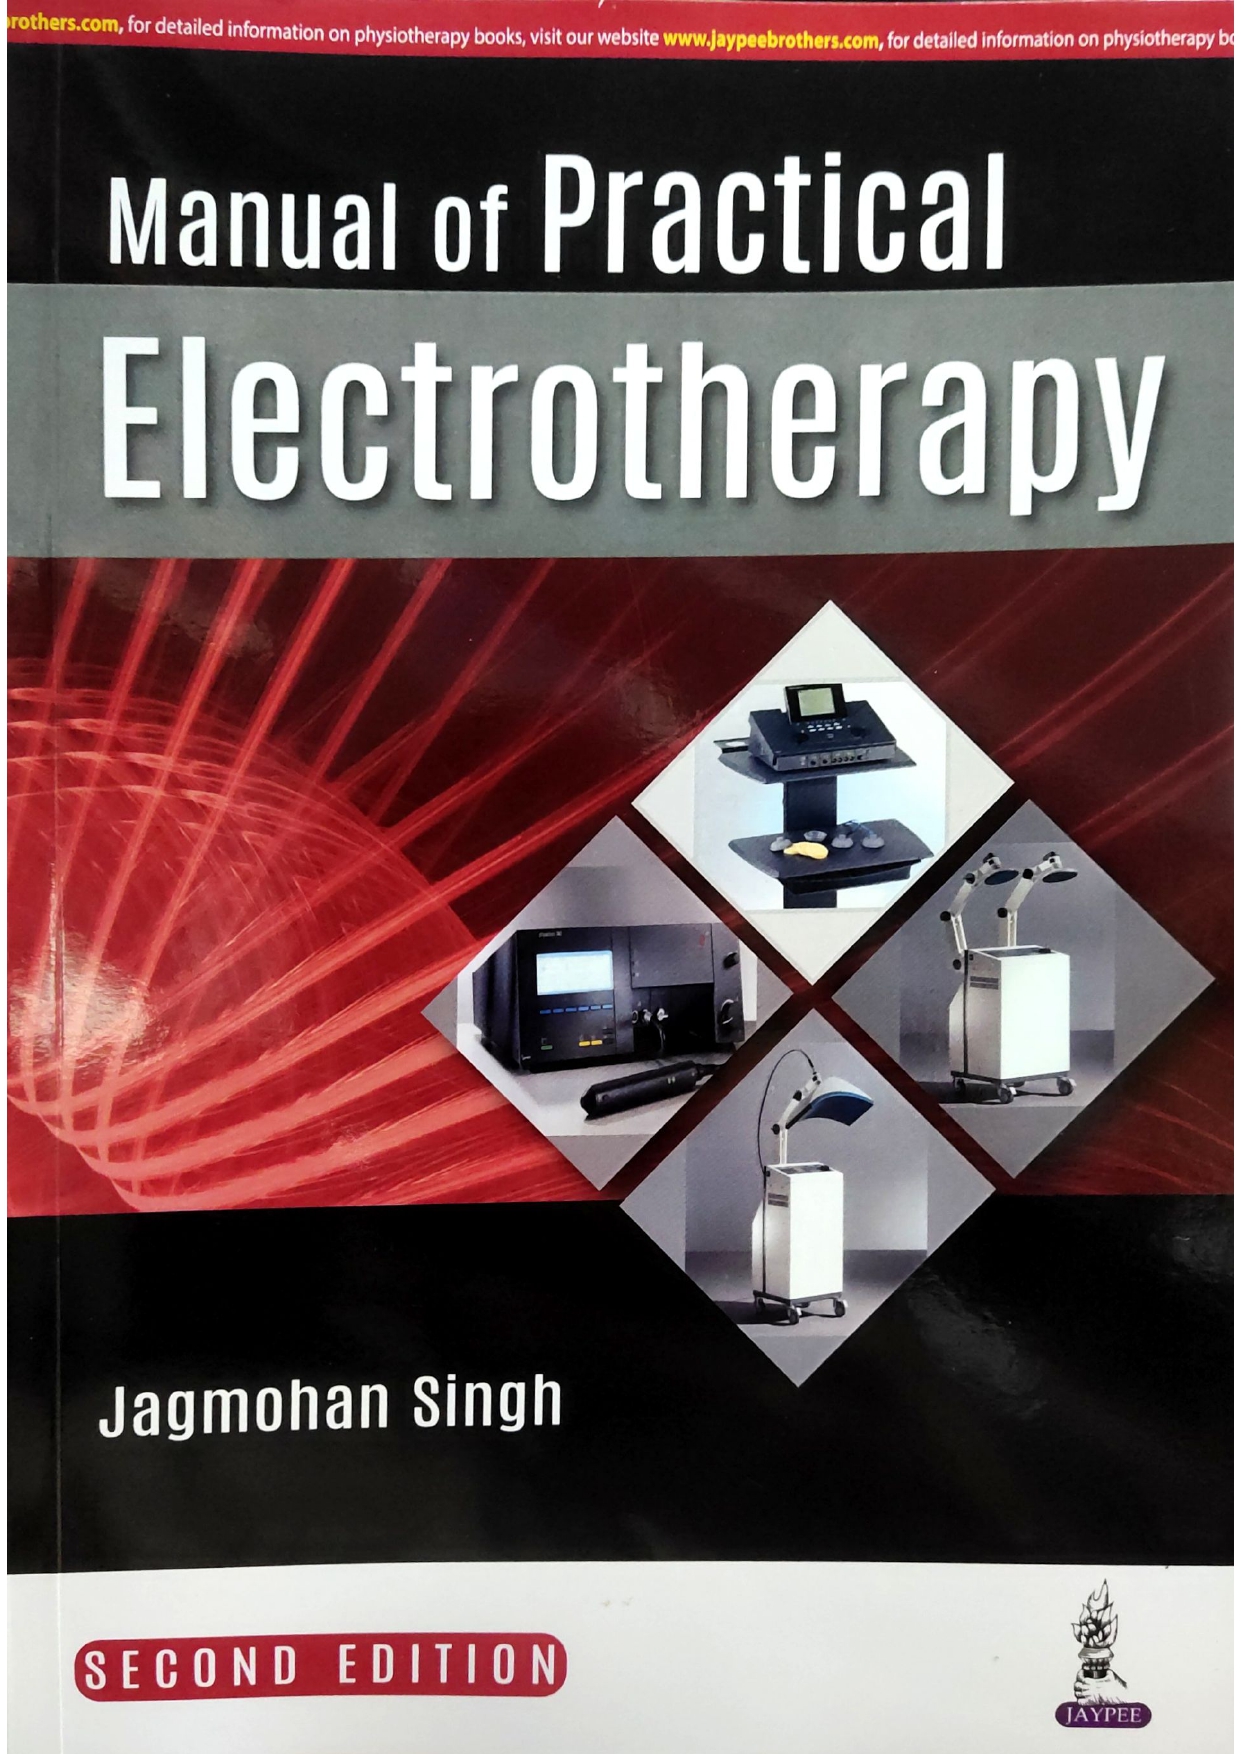 manual-of-practical-electrotherapy